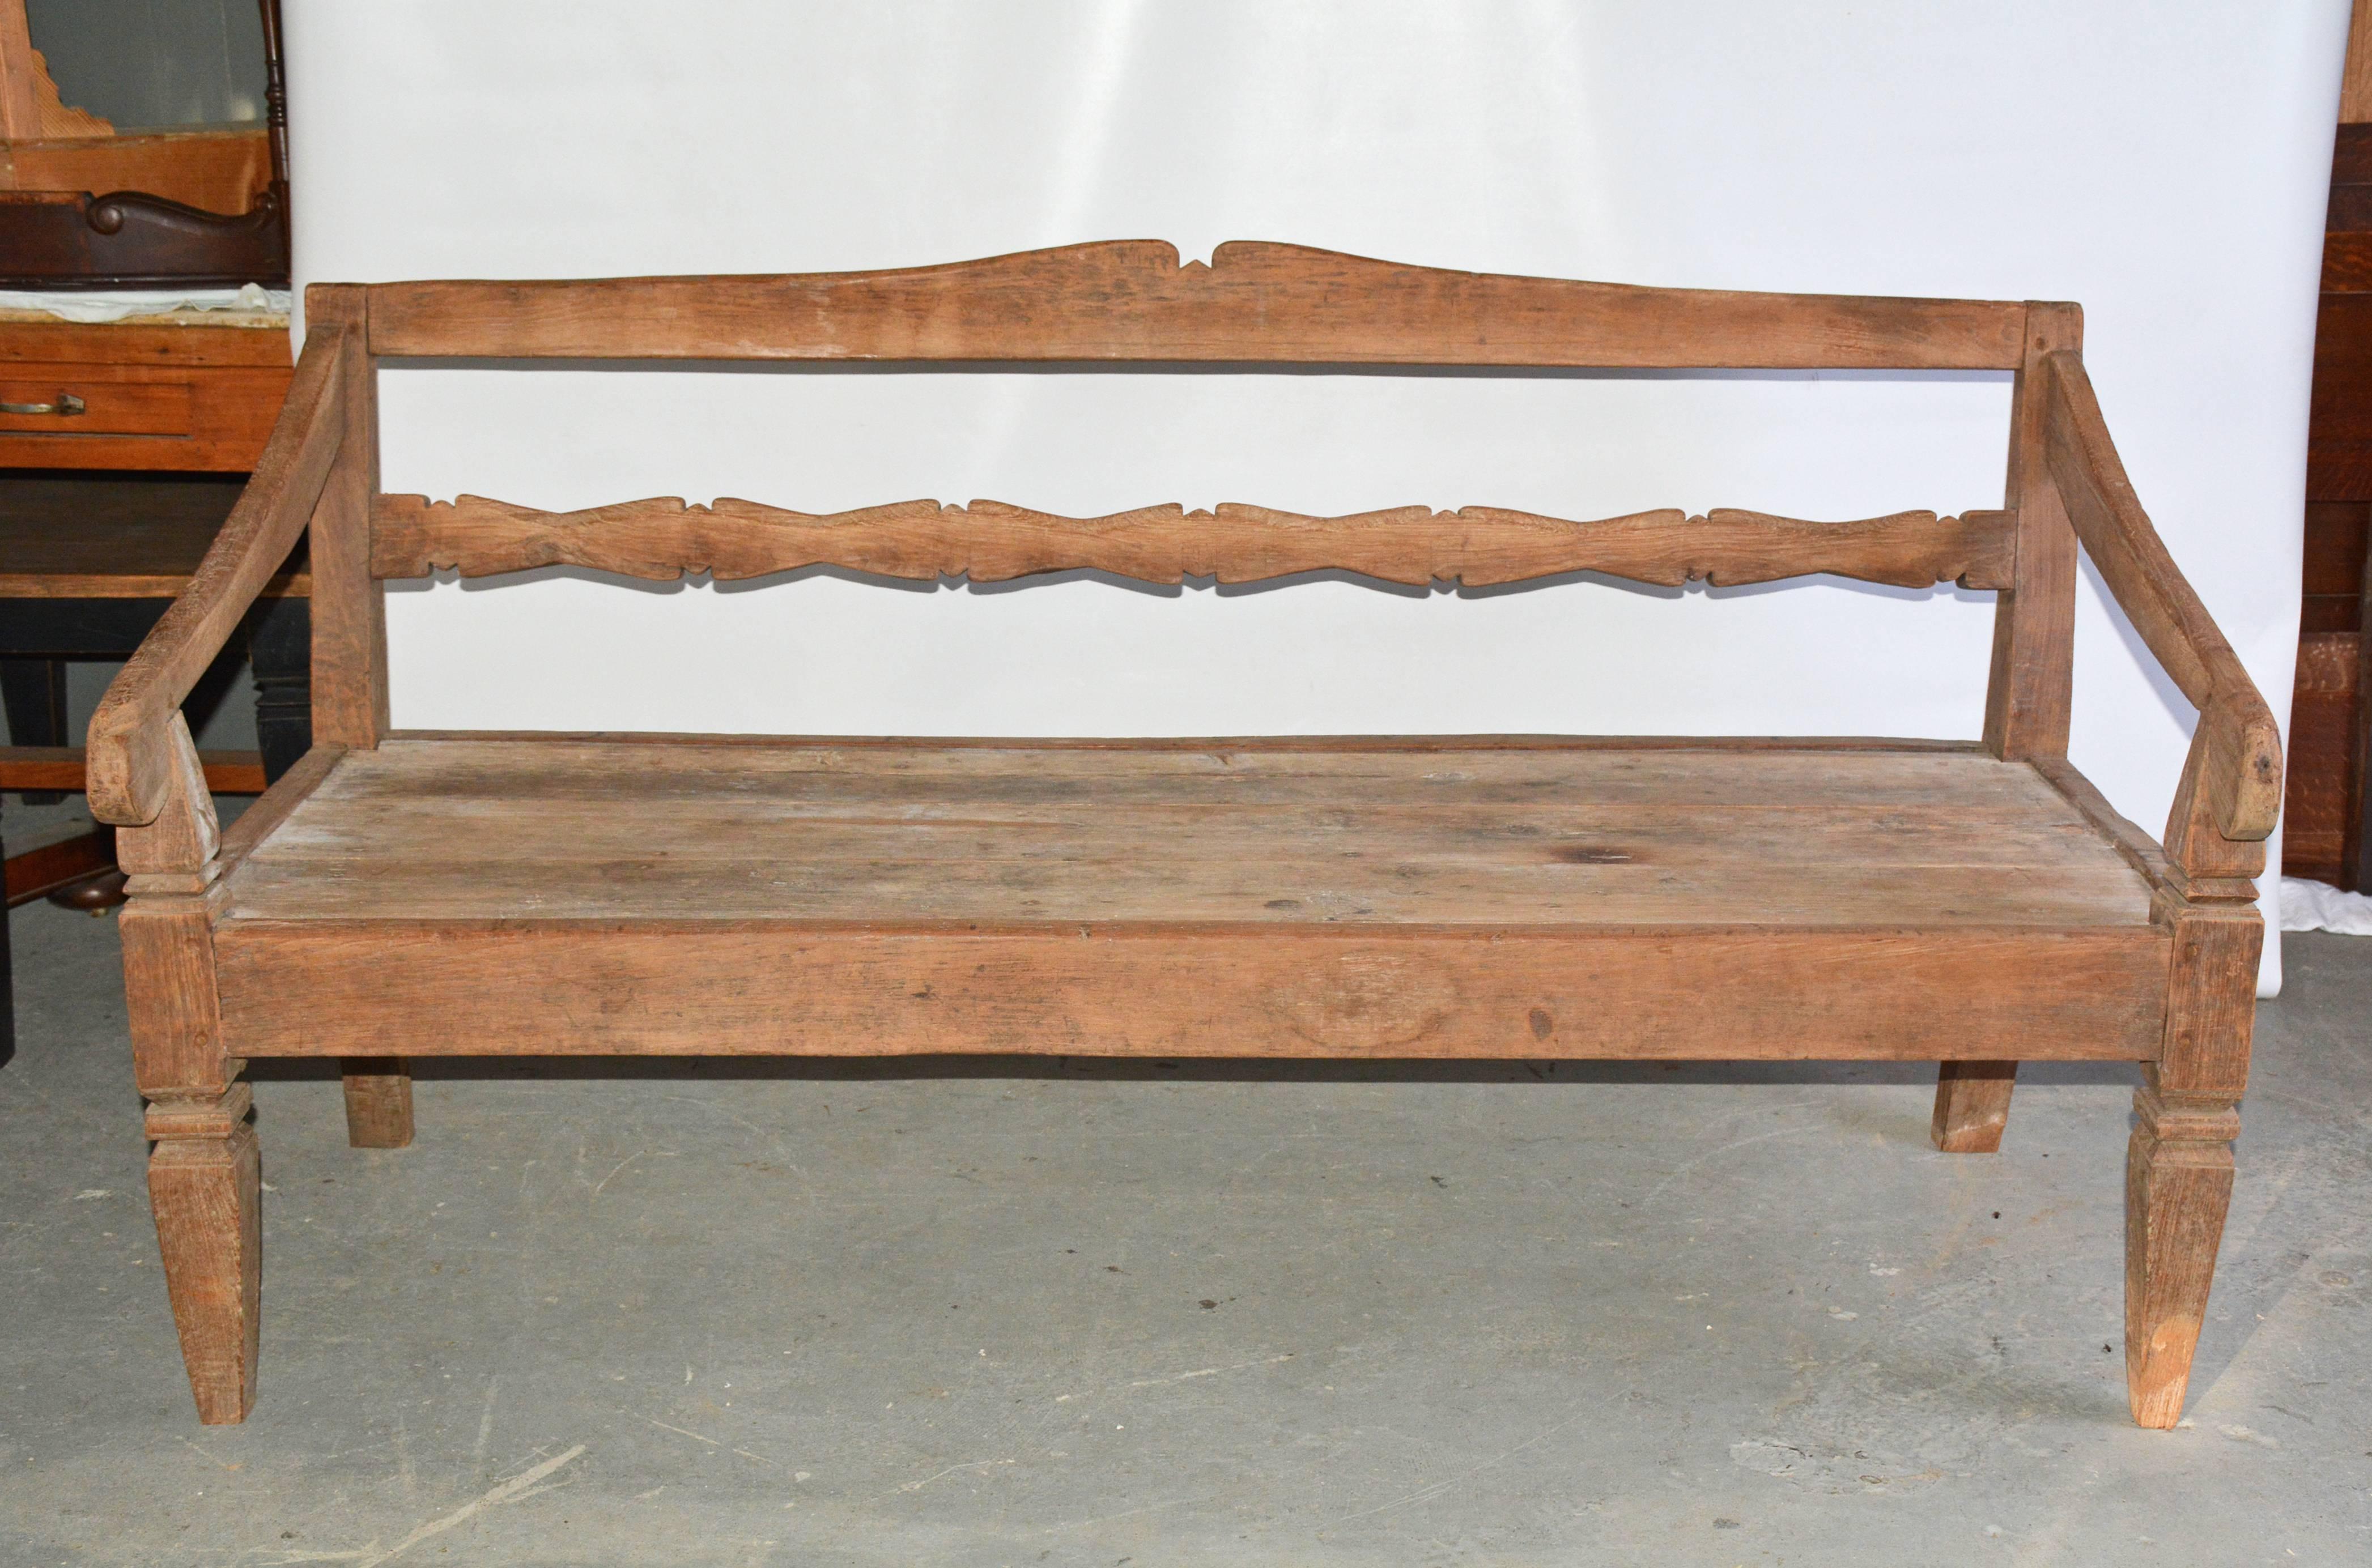 Rustic indoor or outdoor teakwood garden sofa or settee has hand-carved details on the front legs, arms and back. The planked seat is wide and long enough to be turned into a daybed with appropriate padding. Great in garden or on patio.
Search